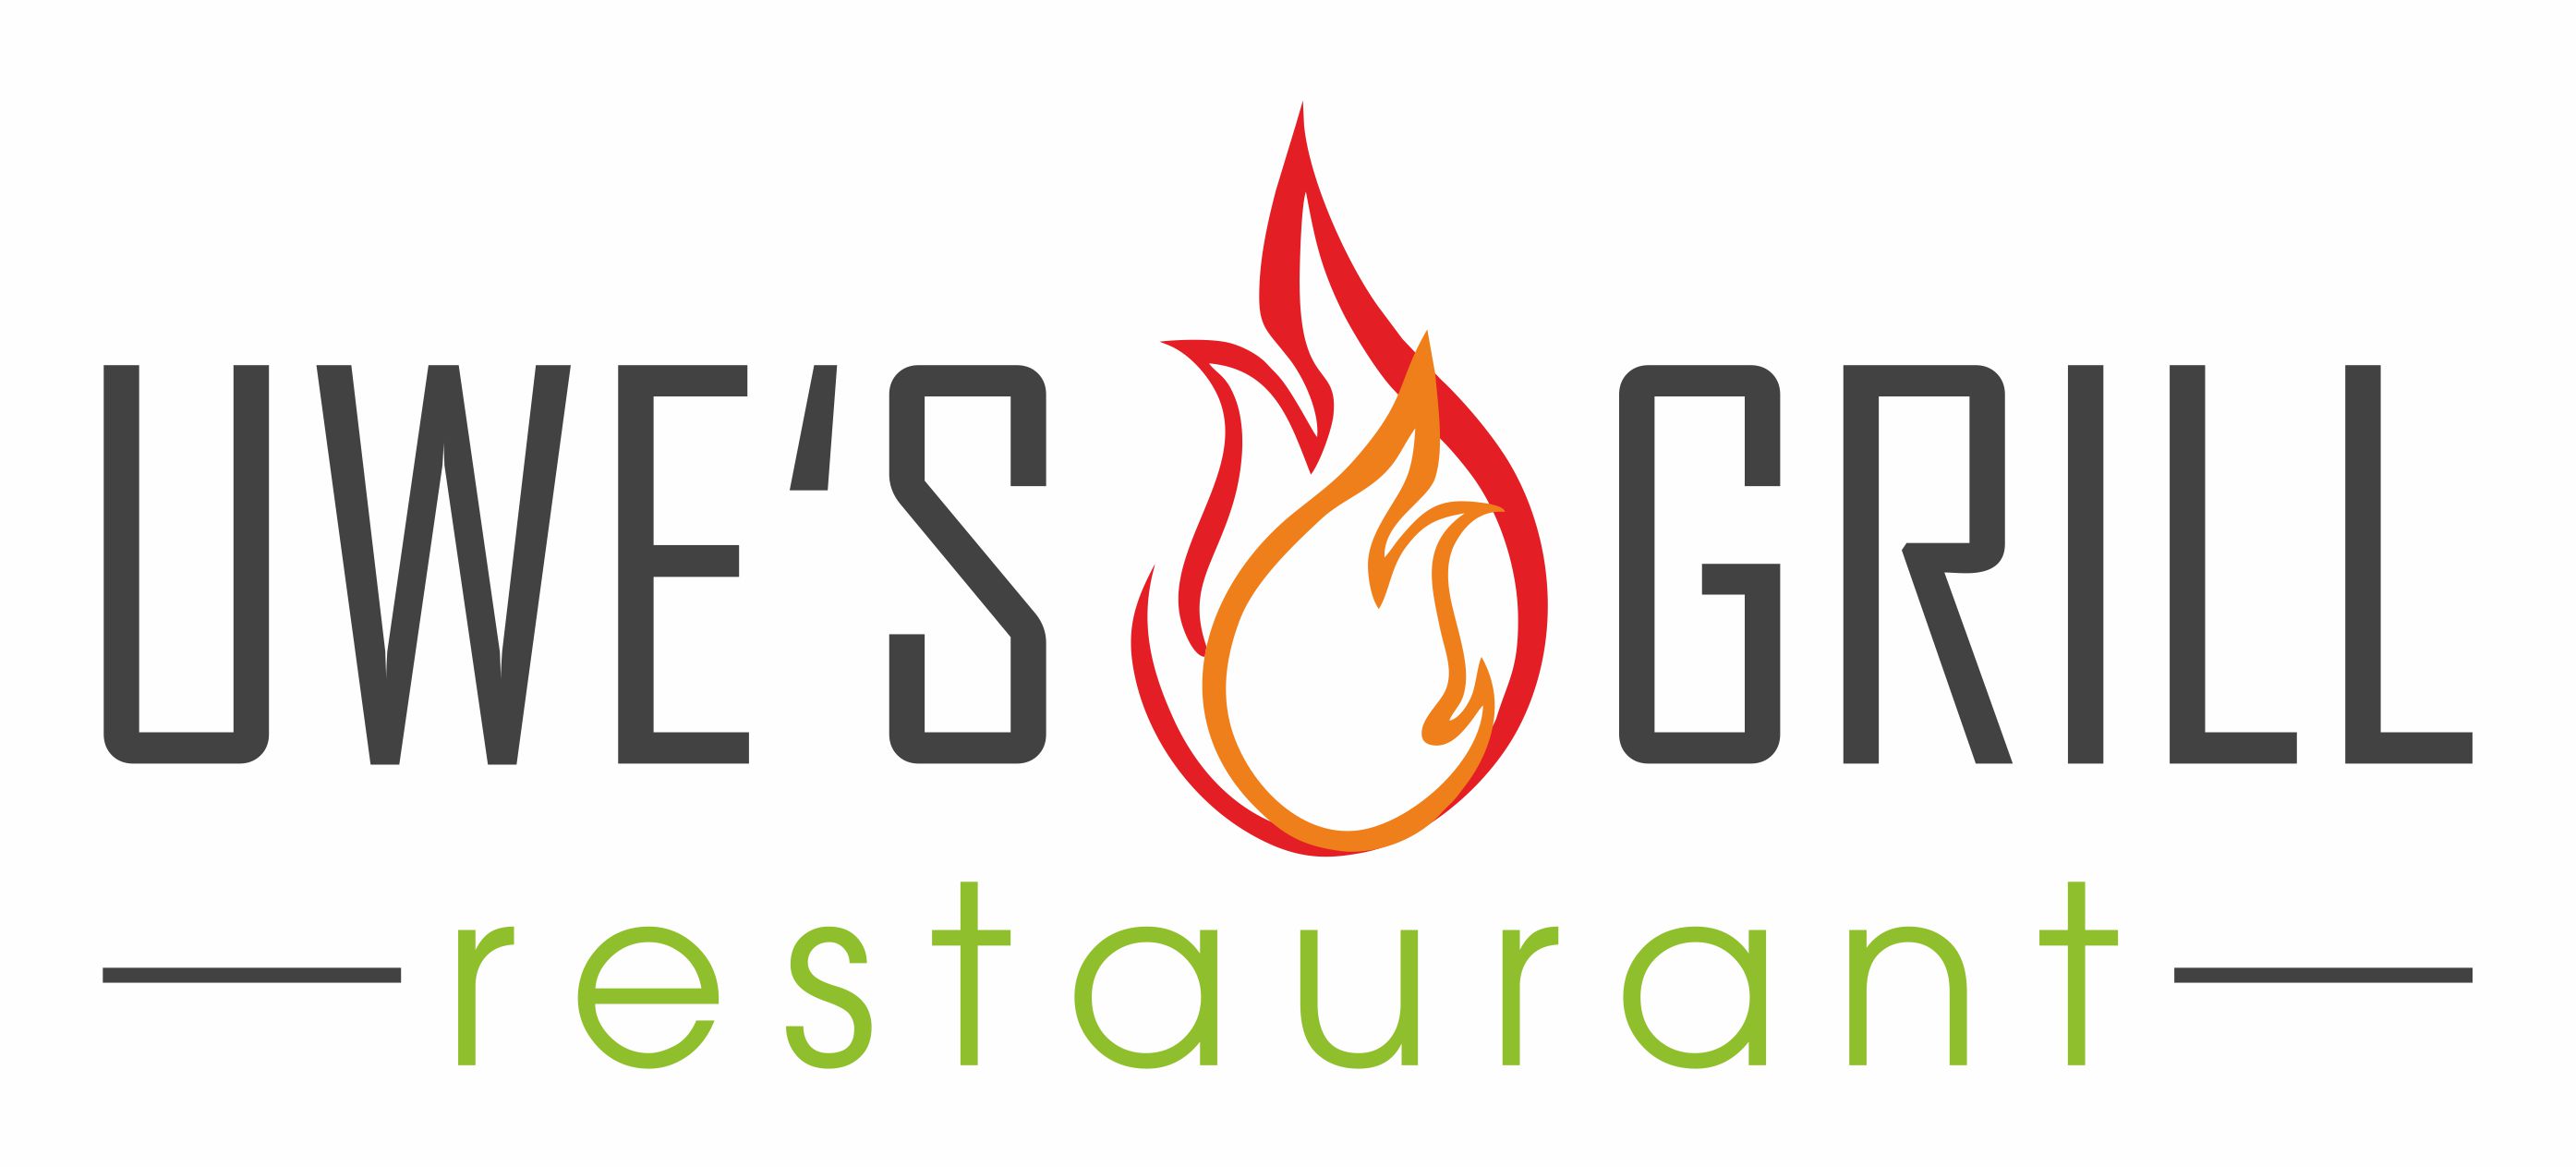 Uwes Grill